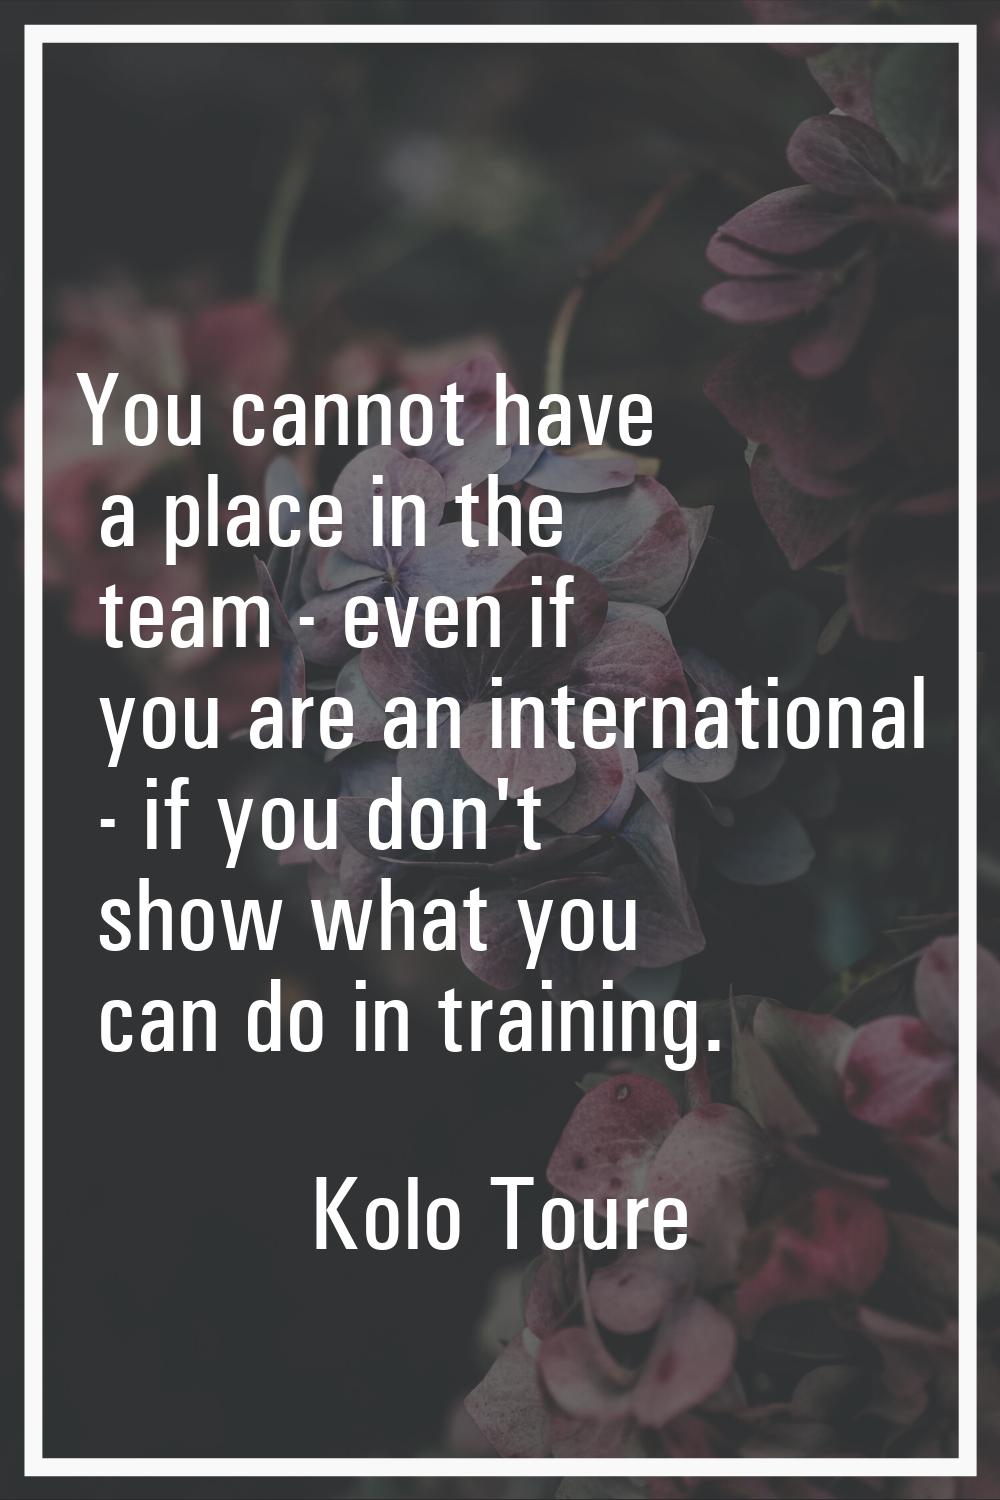 You cannot have a place in the team - even if you are an international - if you don't show what you